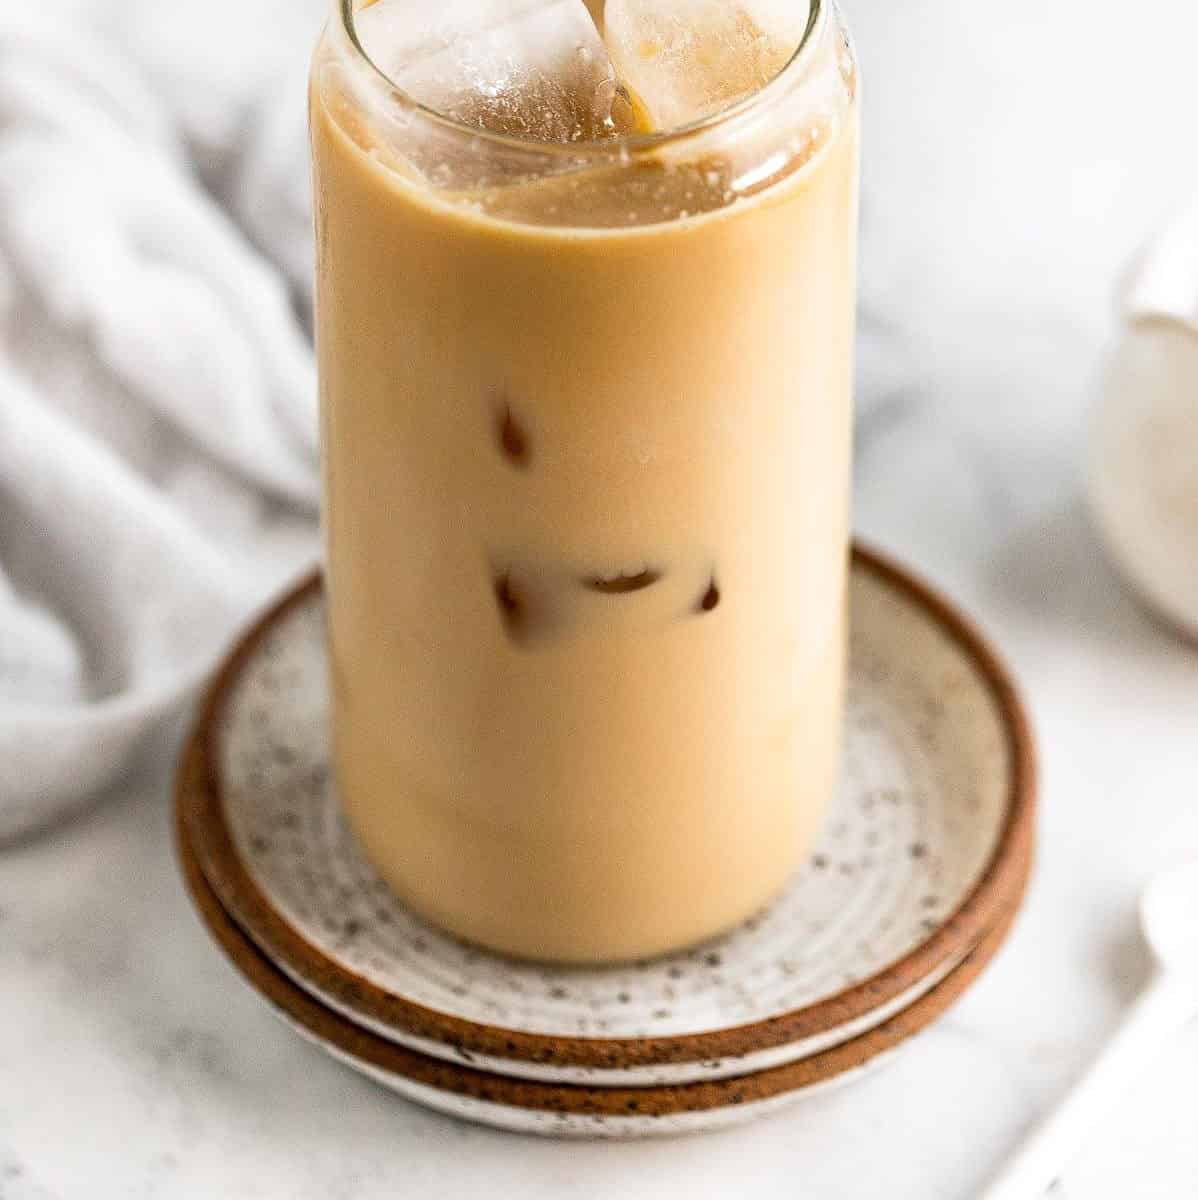  Sip on this chilled latte to help you power through the afternoon slump.